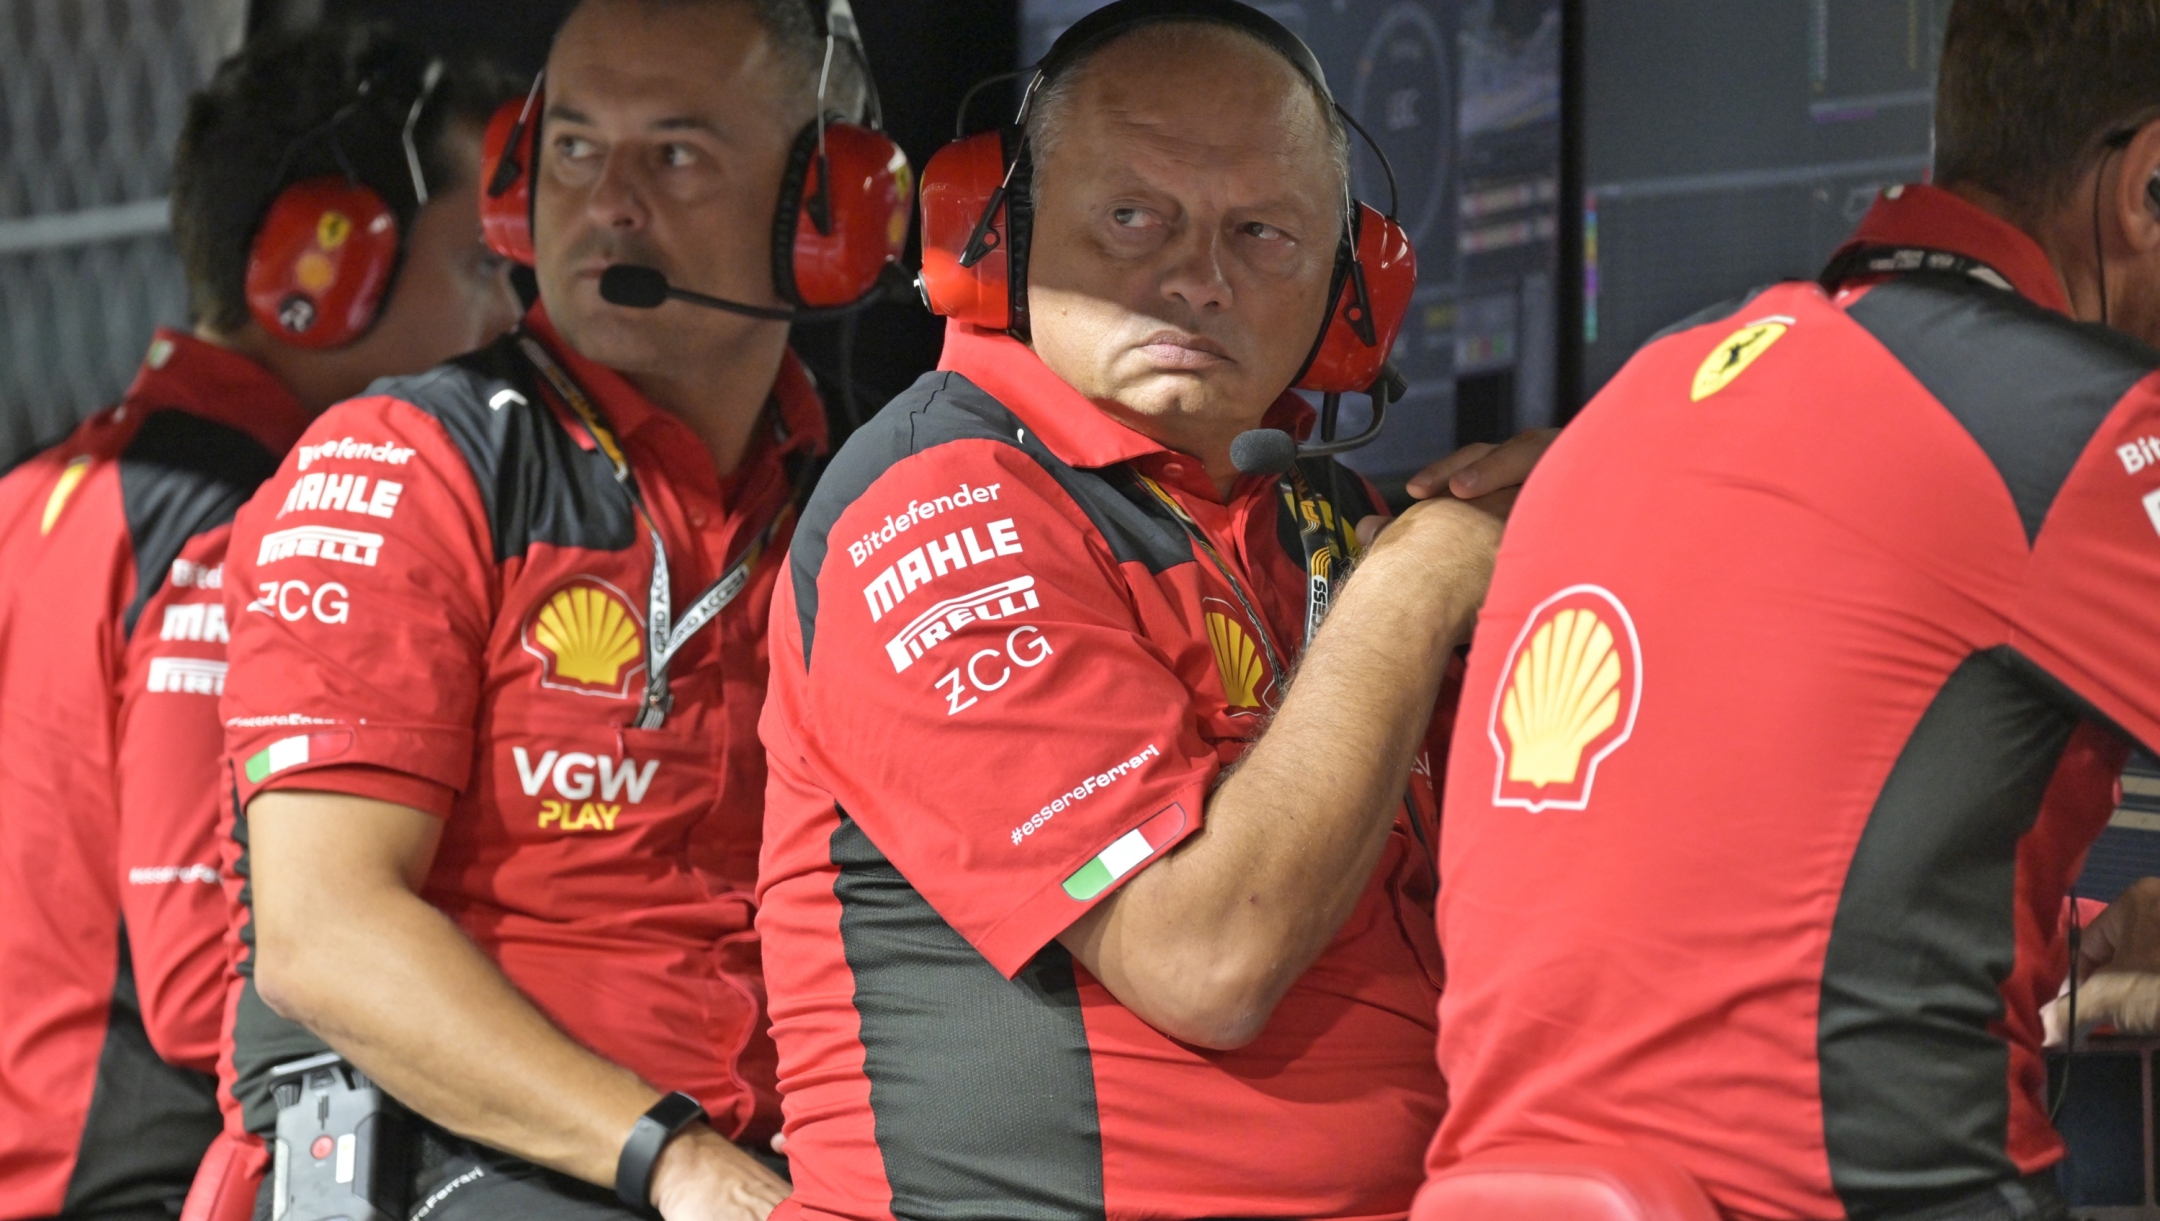 Ferrari team principal Frederic Vasseur, second from right, looks during the qualifying session of the Singapore Formula One Grand Prix at the Marina Bay circuit, Singapore, Saturday, Sept. 16, 2023. (Caroline Chia/Pool Photo via AP)